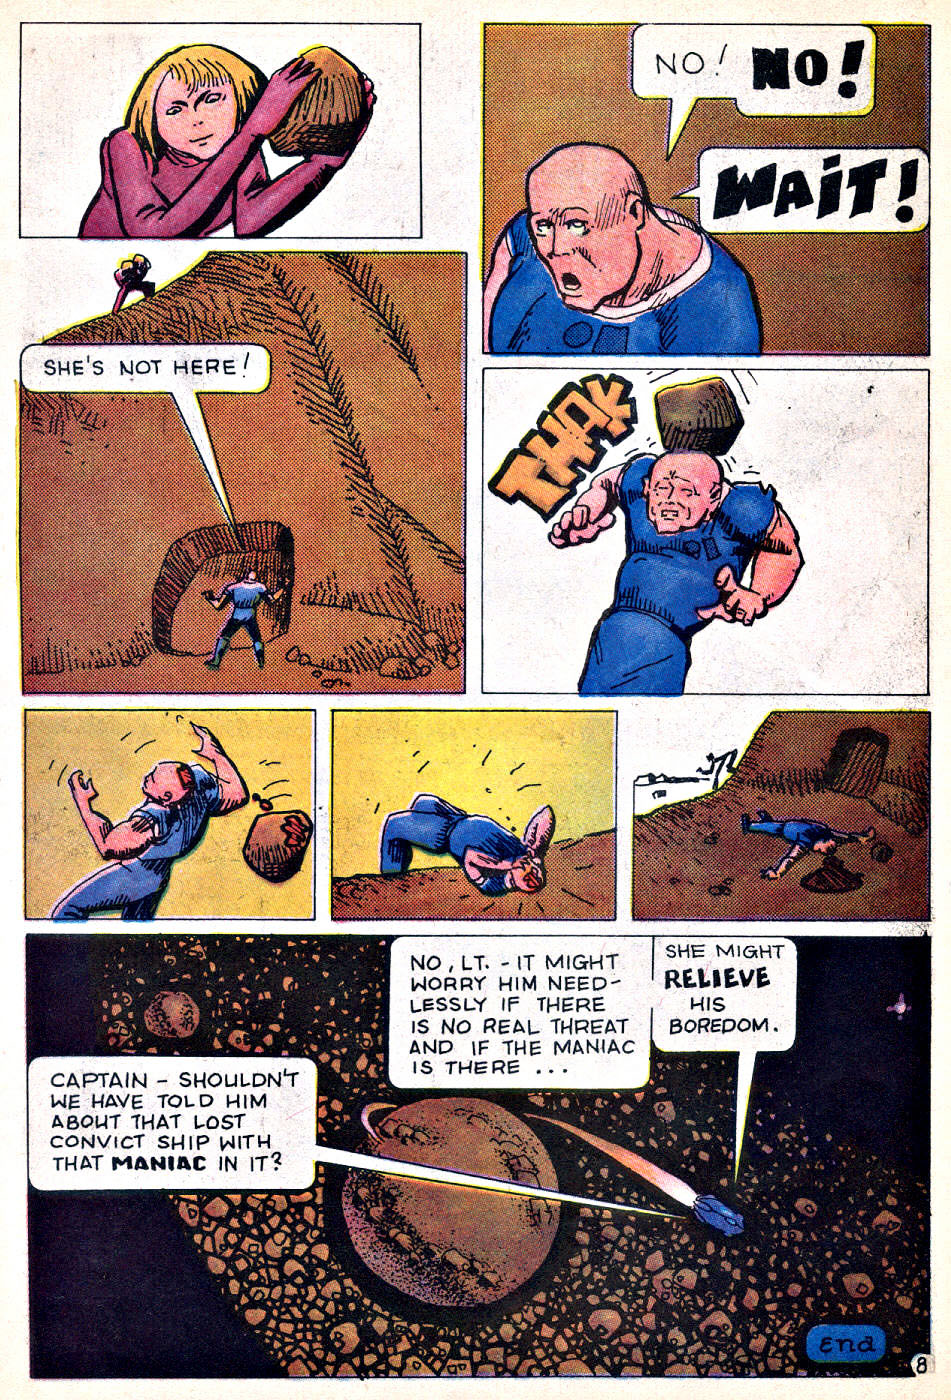 Read online Fantagor comic -  Issue #4 - 20